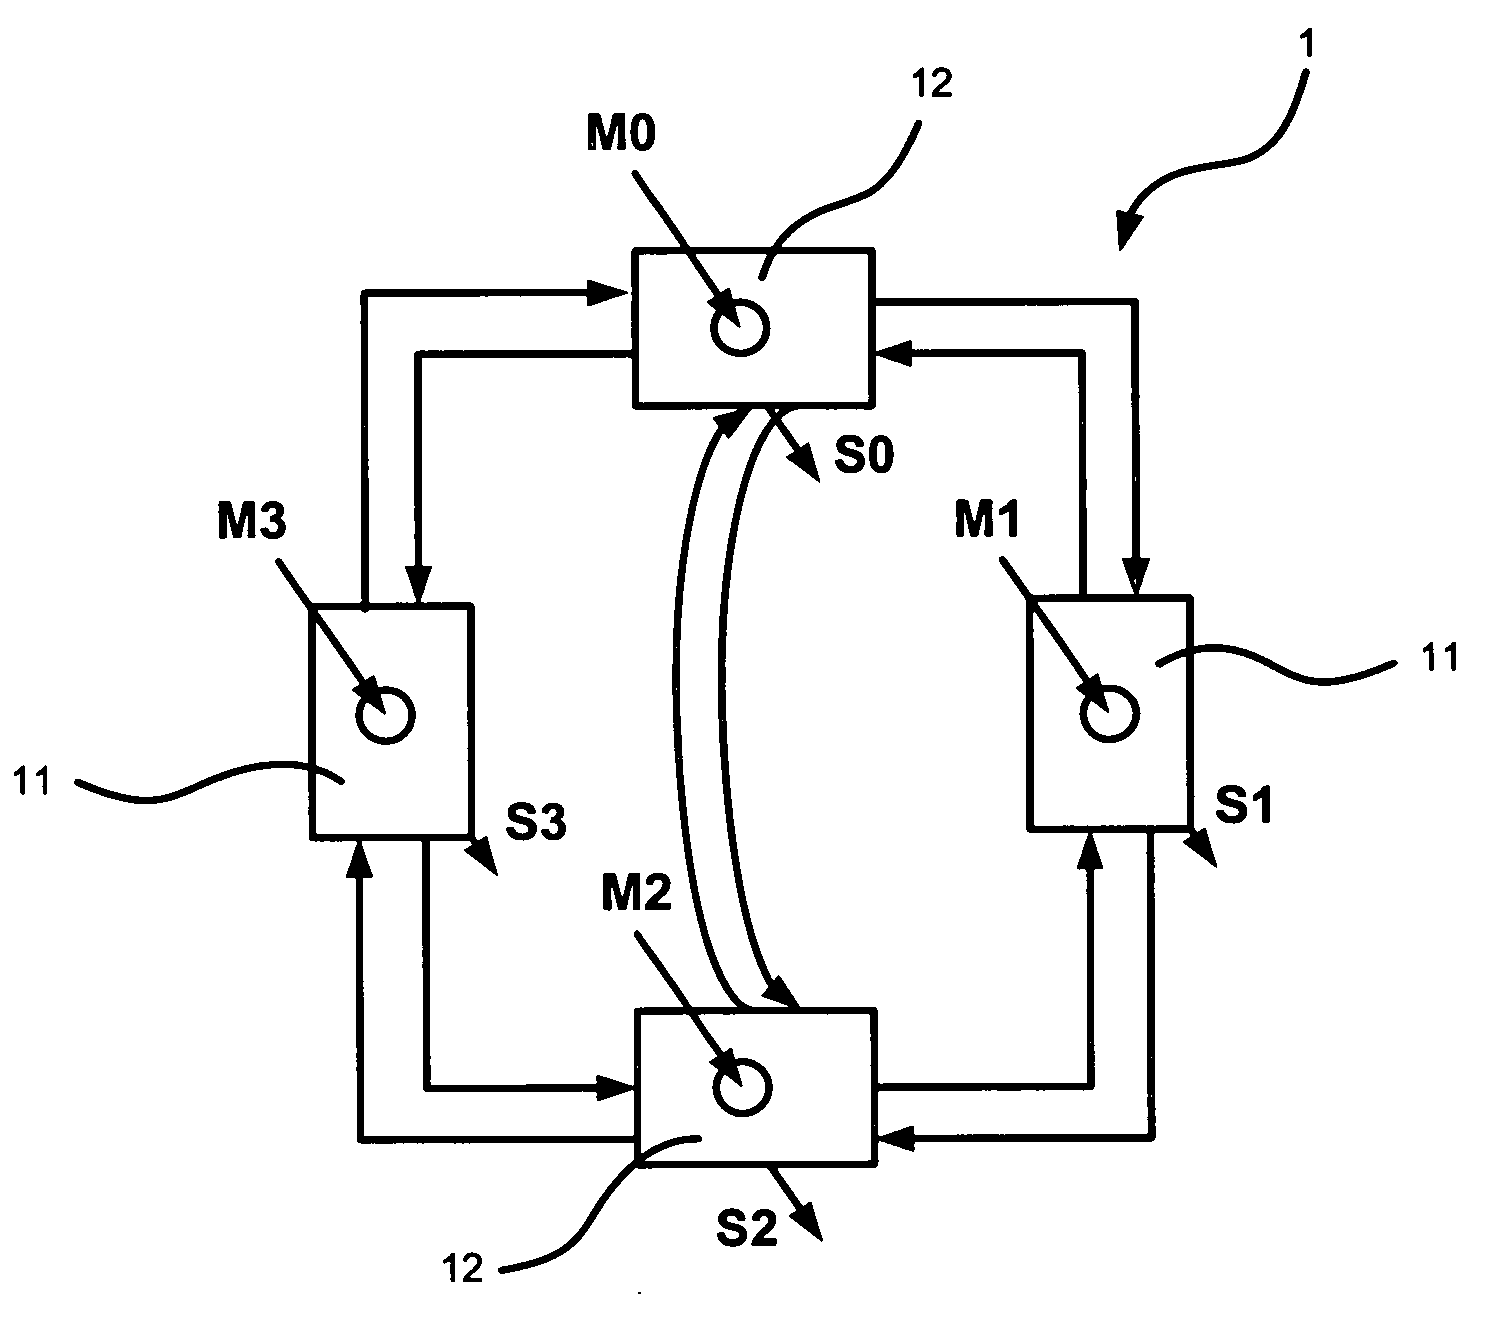 Circuit of on-chip network having four-node ring switch structure